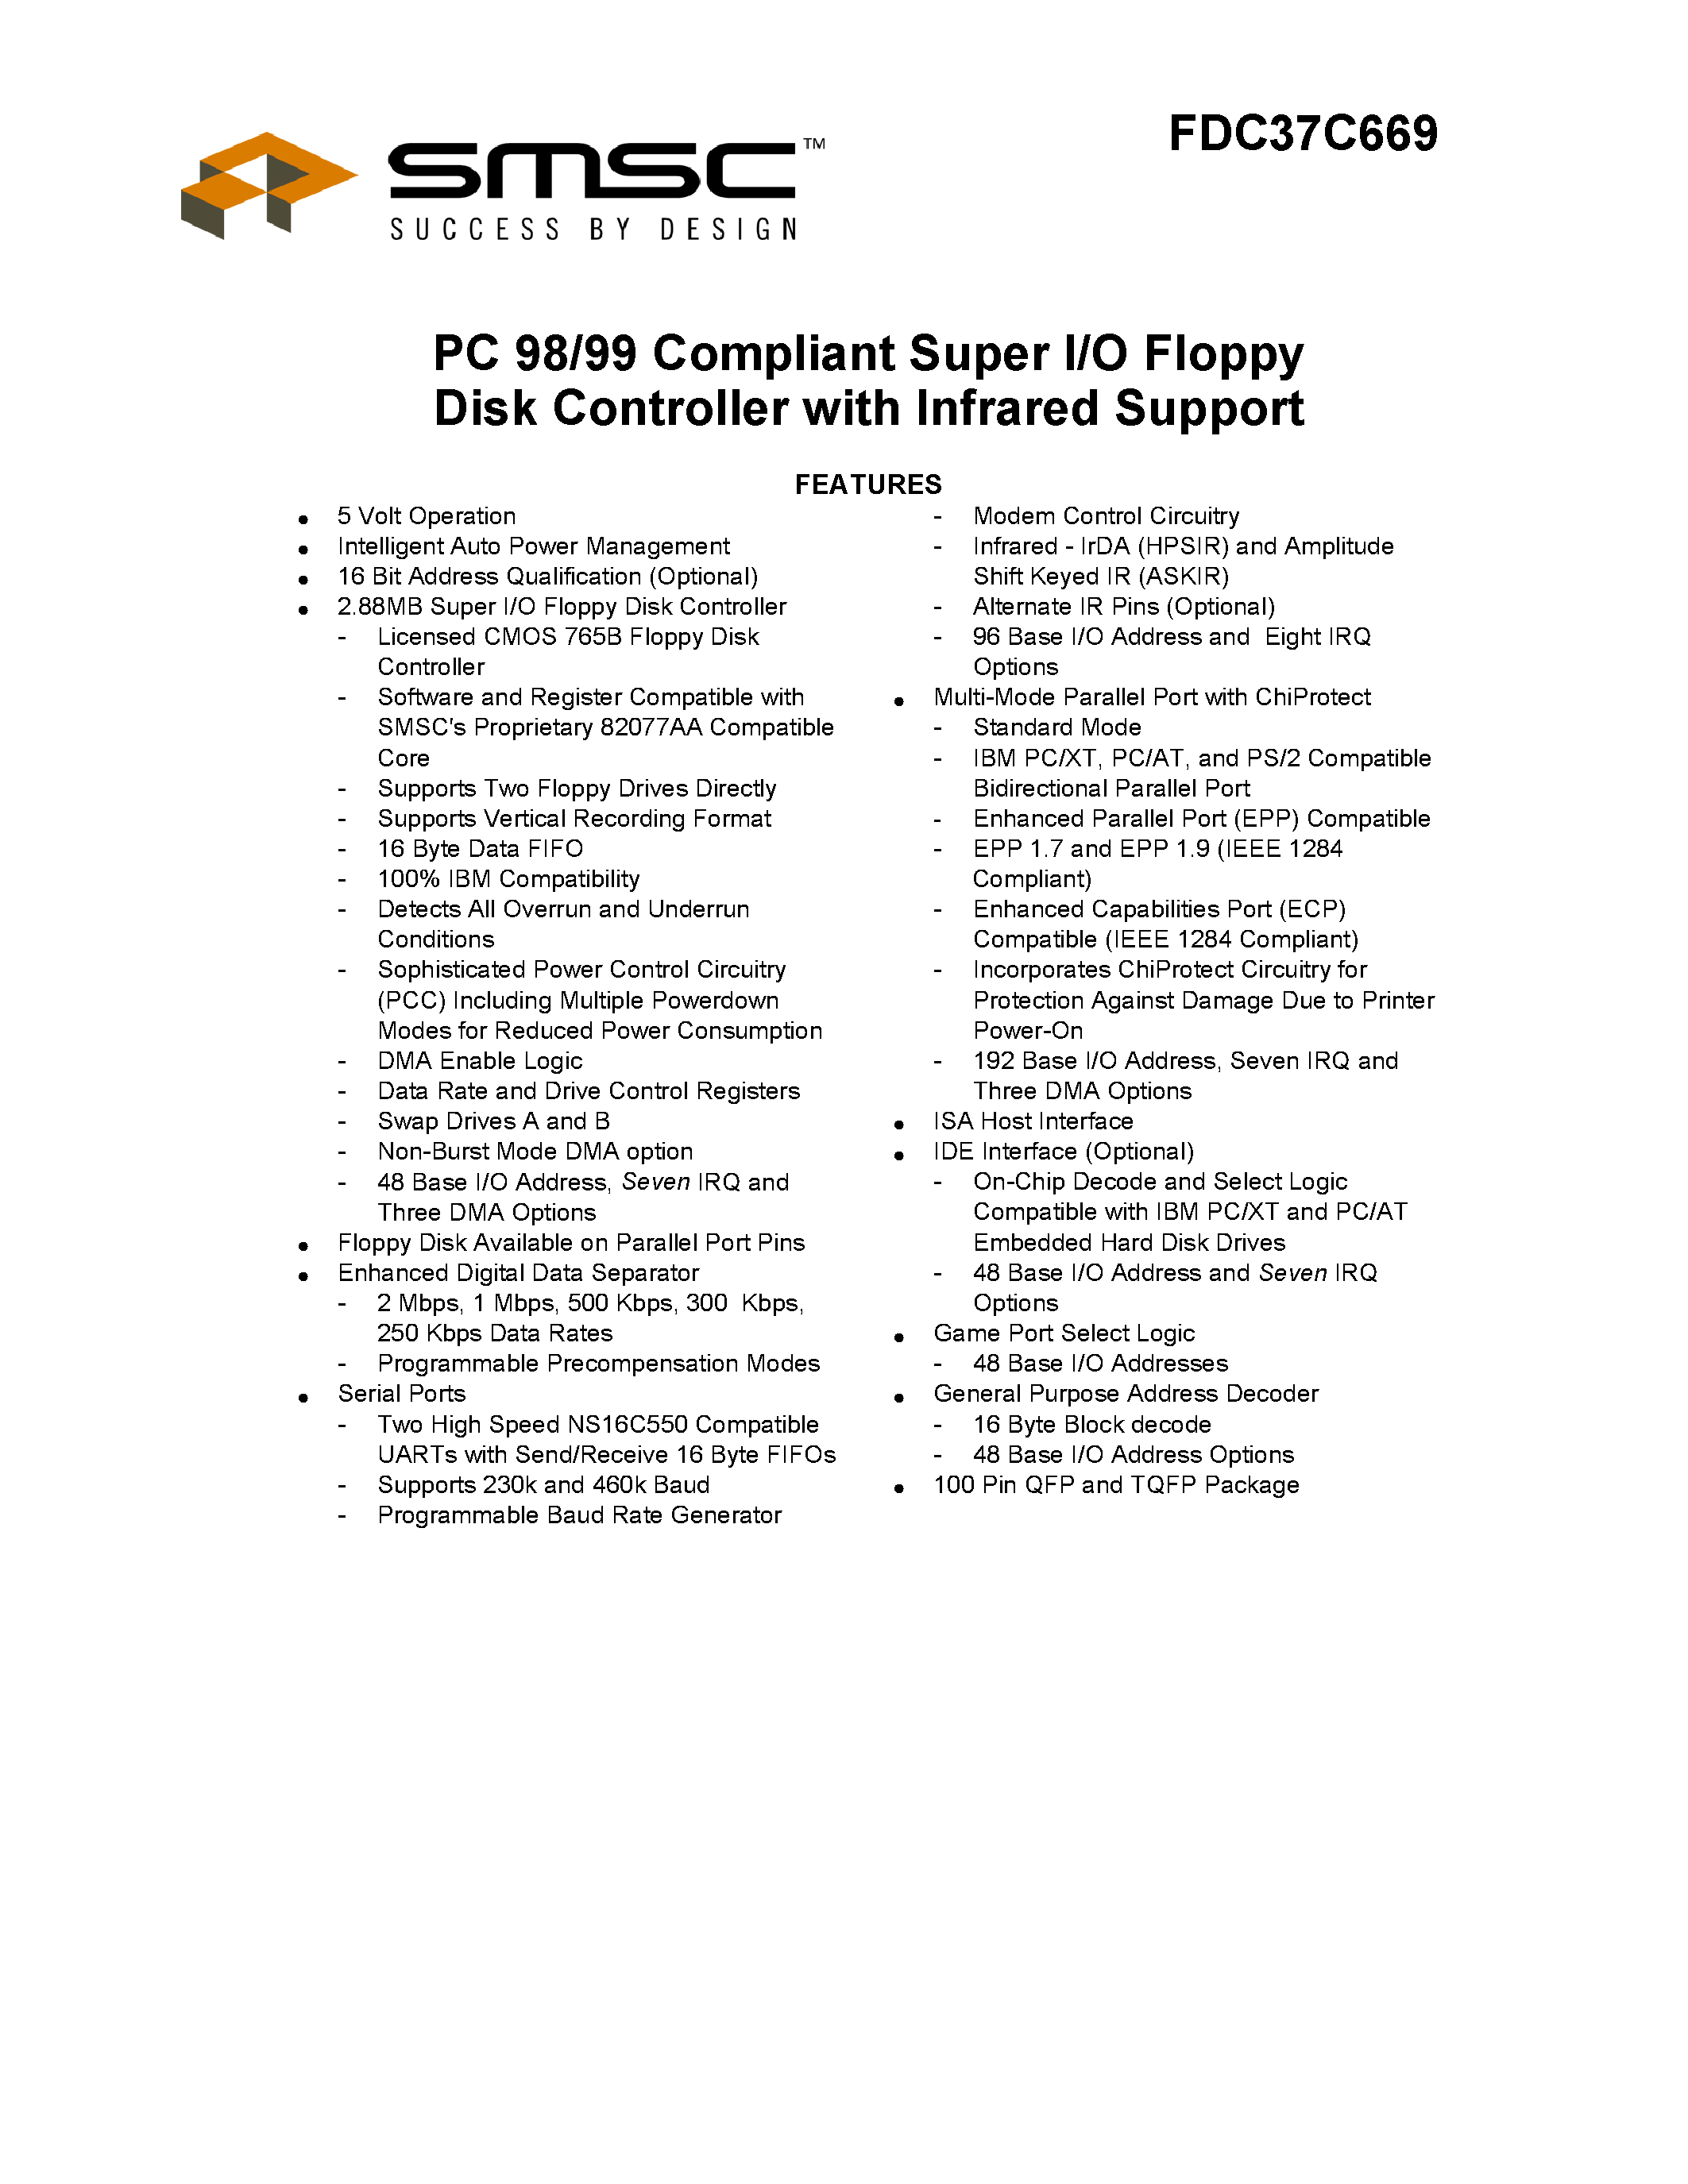 Datasheet FDC37C669 - PC 98/99 COMPLIANT SUPER I/O FLOPPY DISK CONTROLLER WITH INFRARED SUPPORT page 1